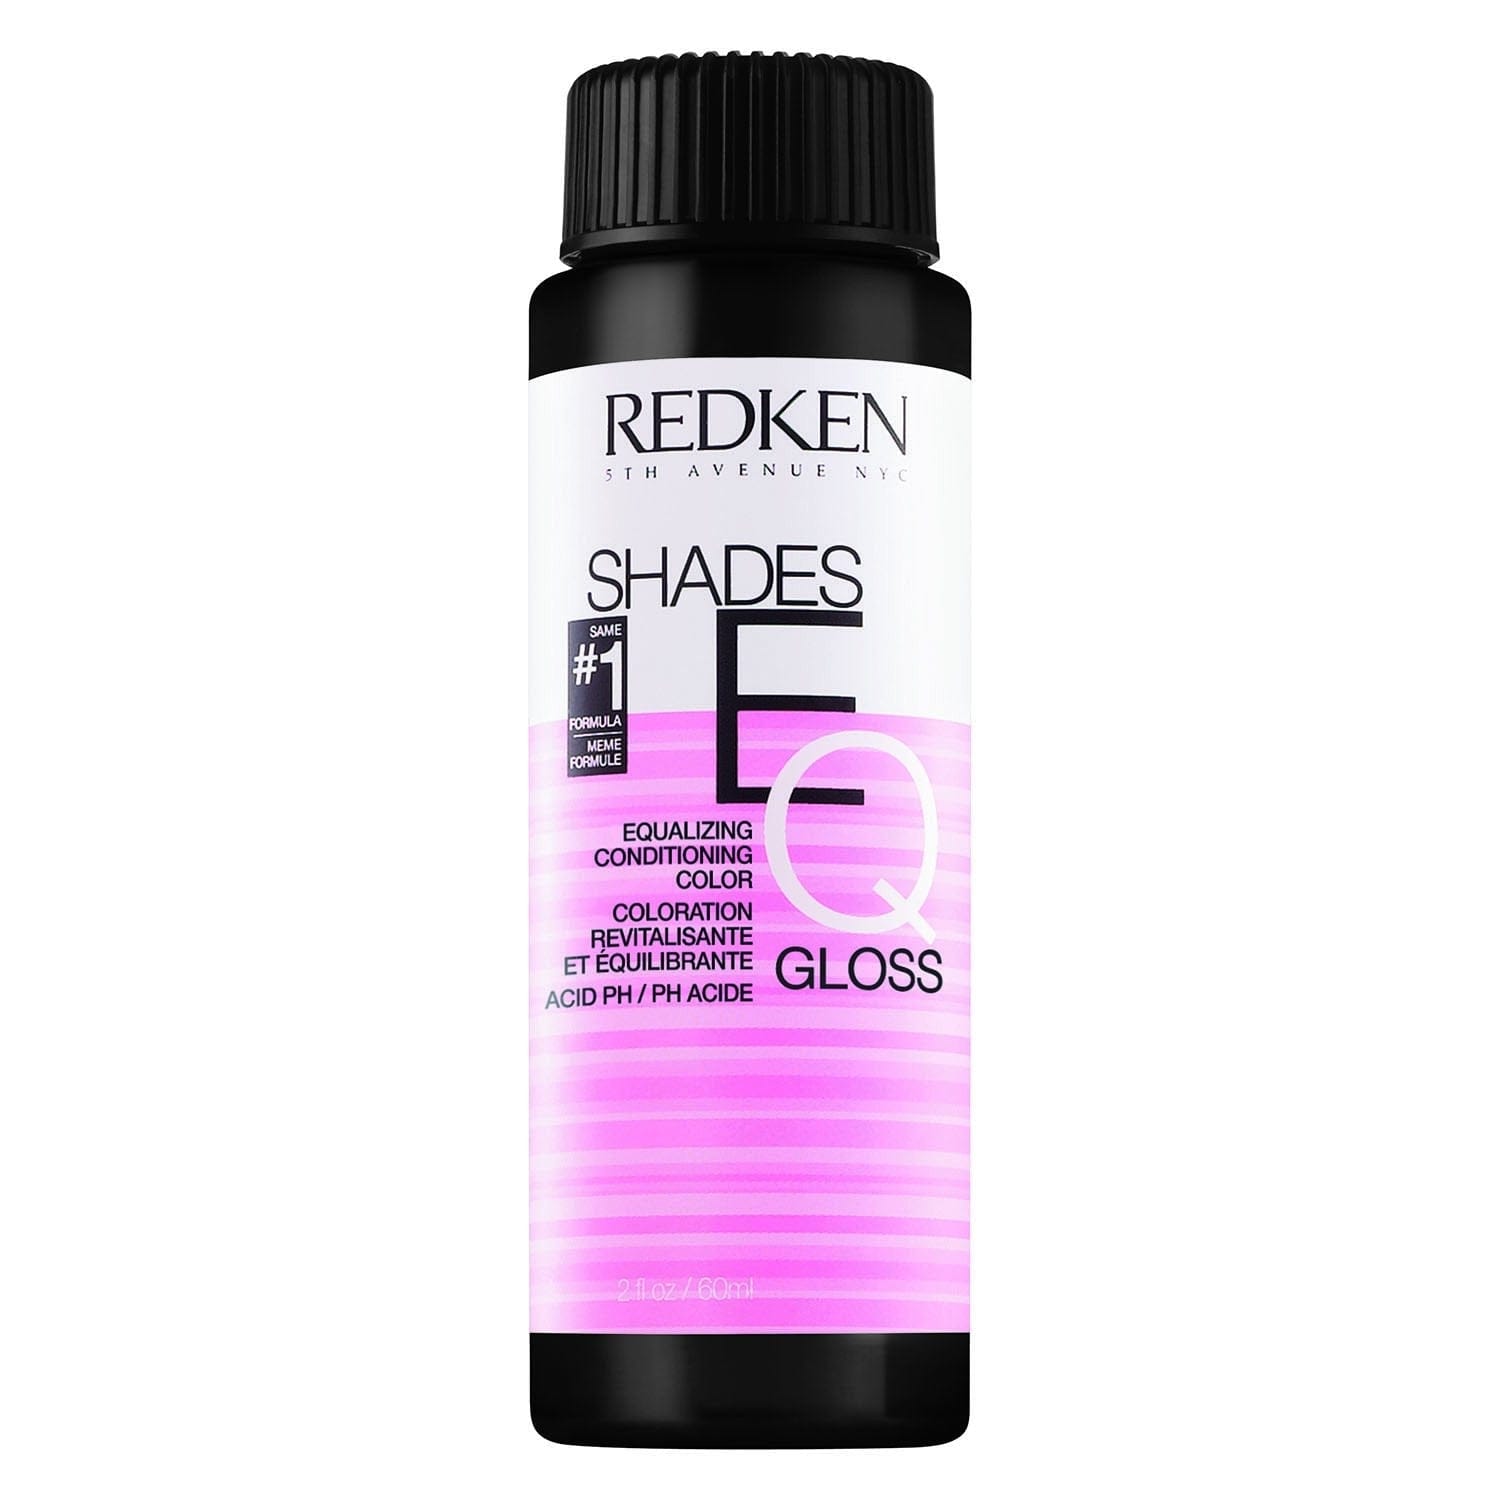 Redken® Shades EQ CURRY 07C - HairBeautyInk